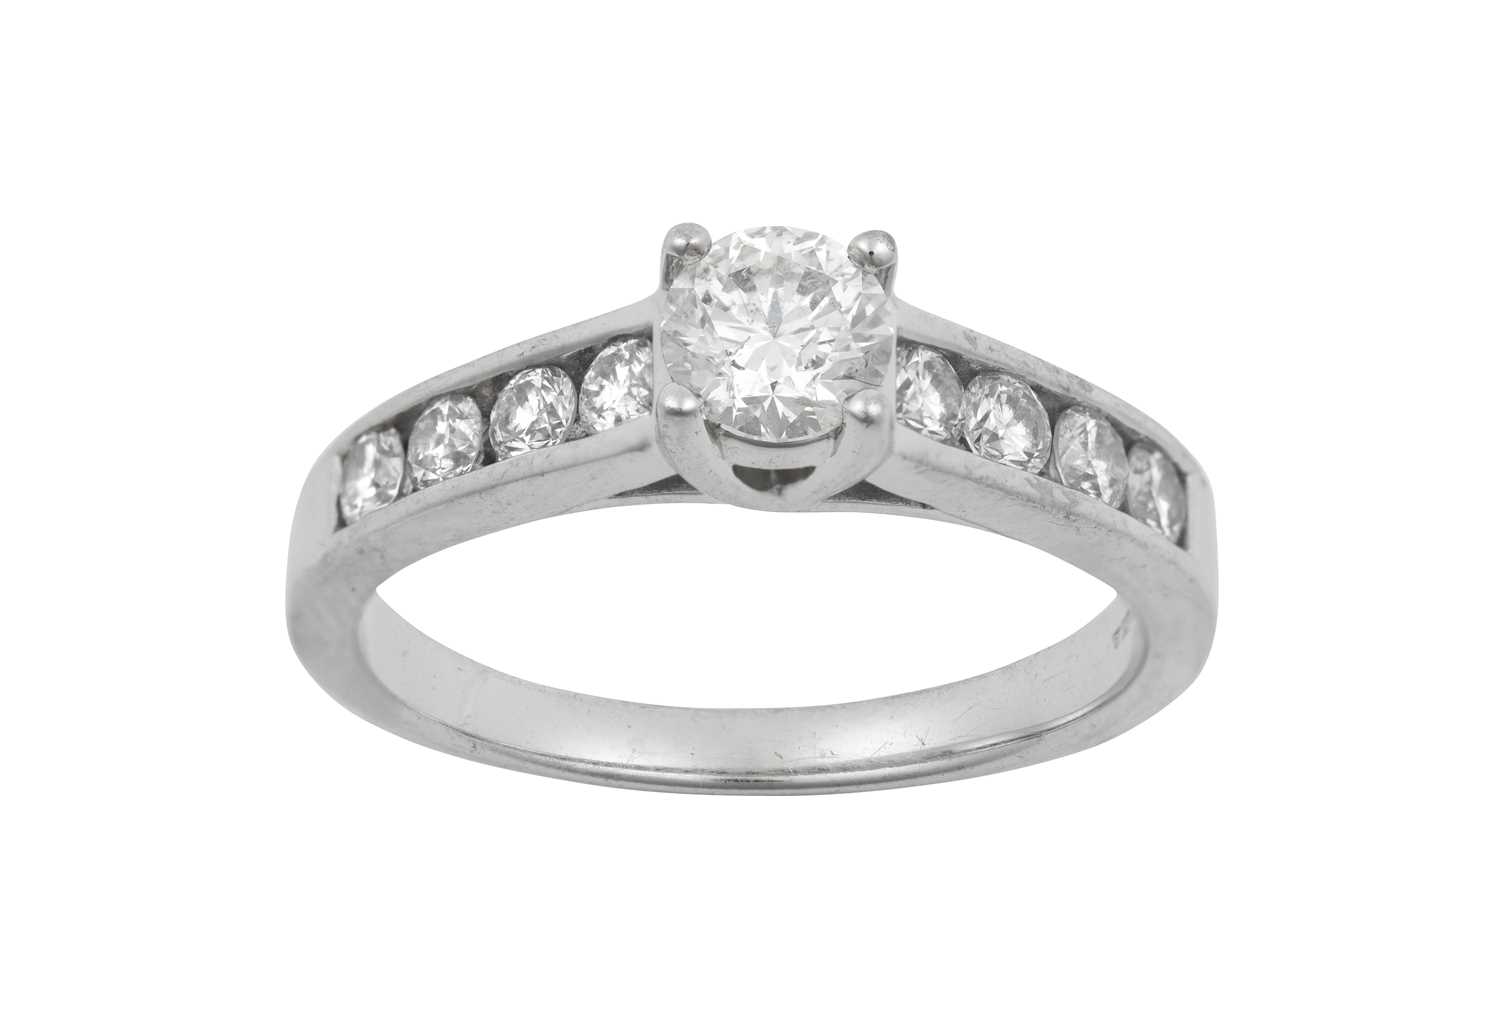 Lot 2053 - An 18 Carat White Gold Diamond Solitaire Ring...